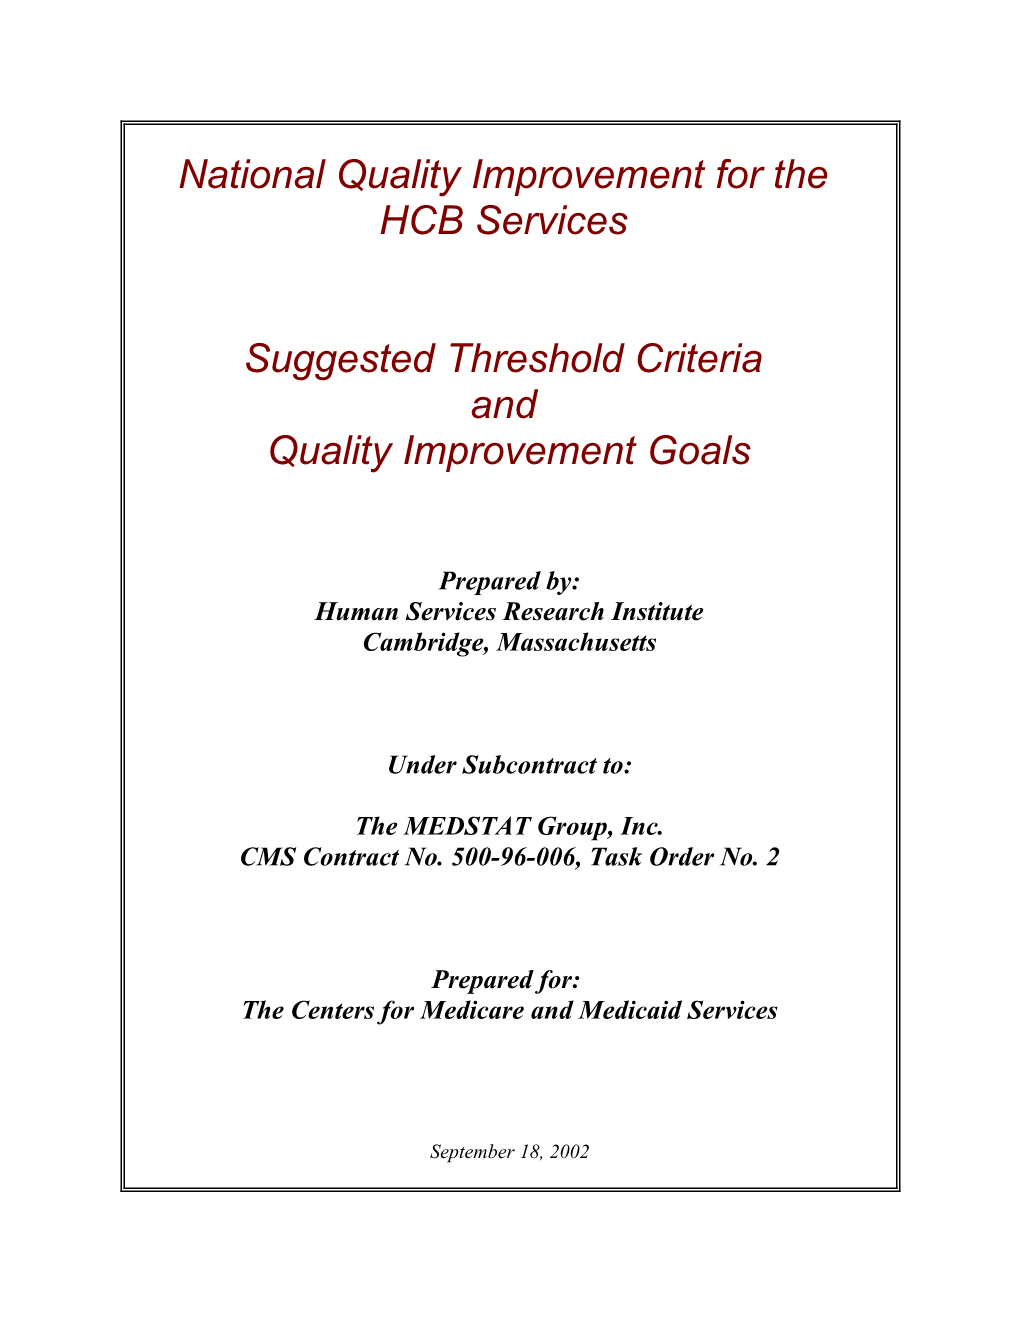 National Quality Improvement for The